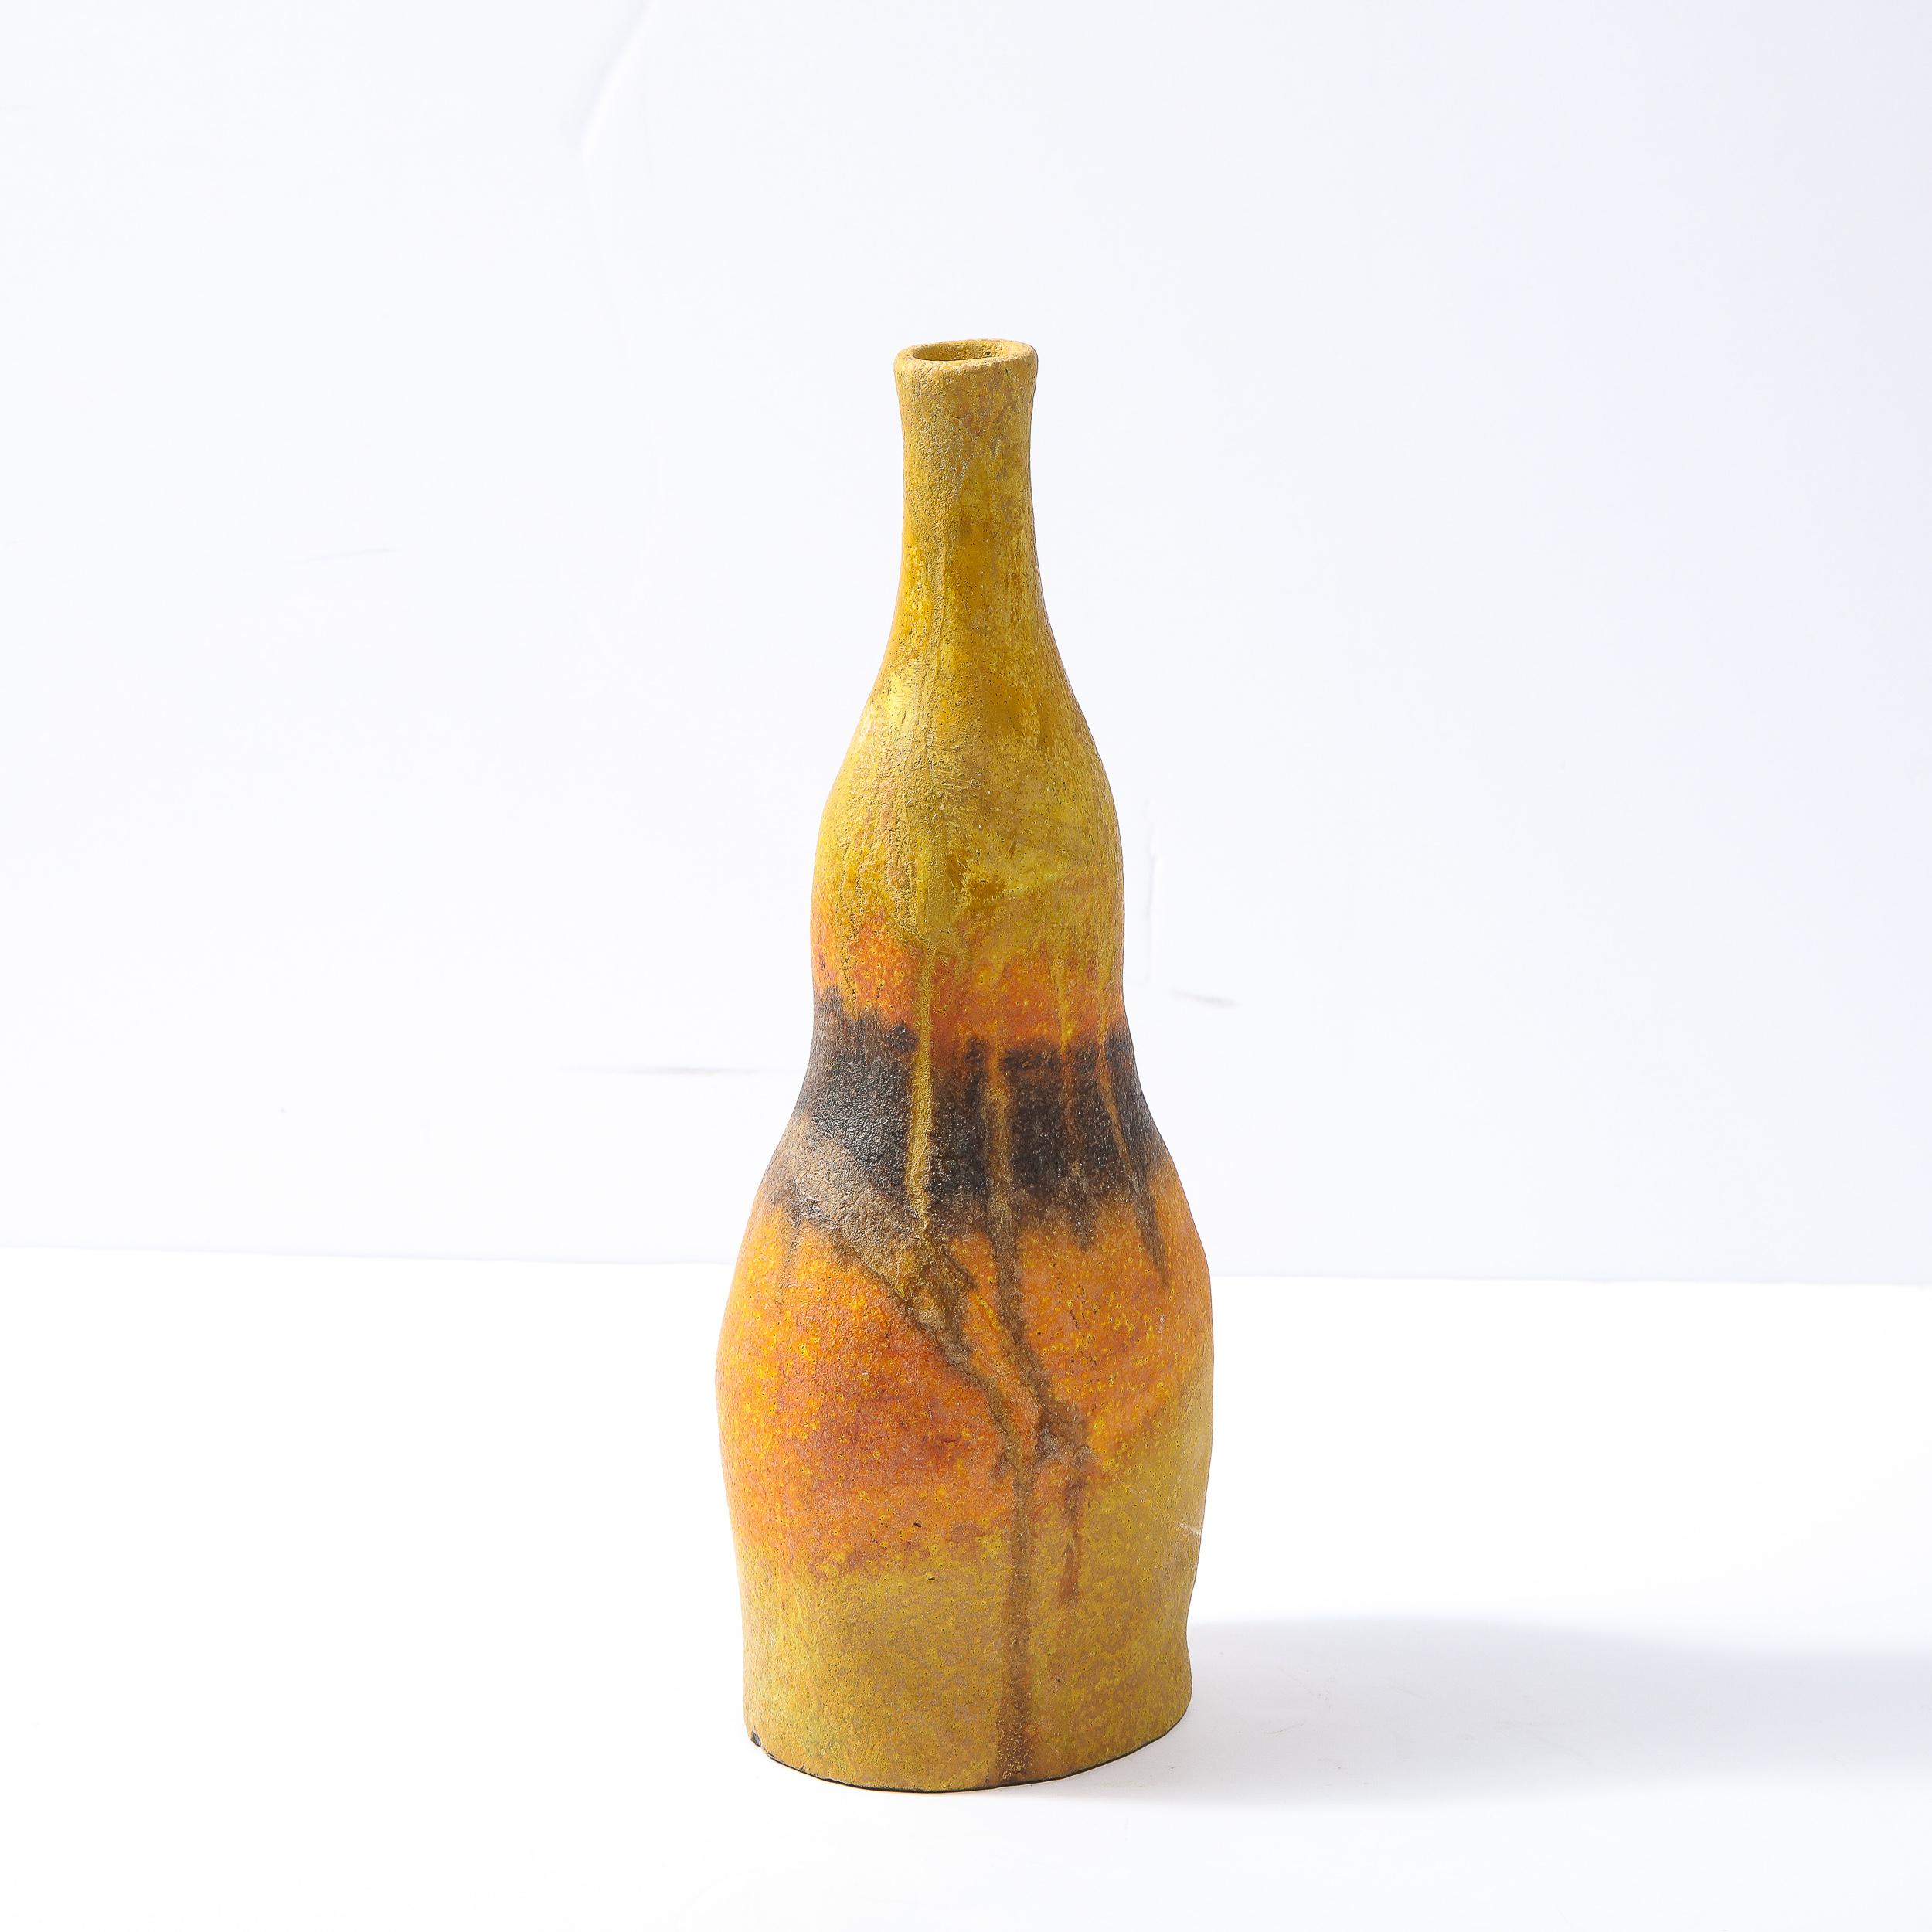 This stunning sculptural vase was realized in Italy, circa 1960 by the esteemed designer and visual artist Marcello Fantoni. It offers an undulating form- full of sinuous curves- in ceramic, hand embellished with expressionistic pigments in sherbet